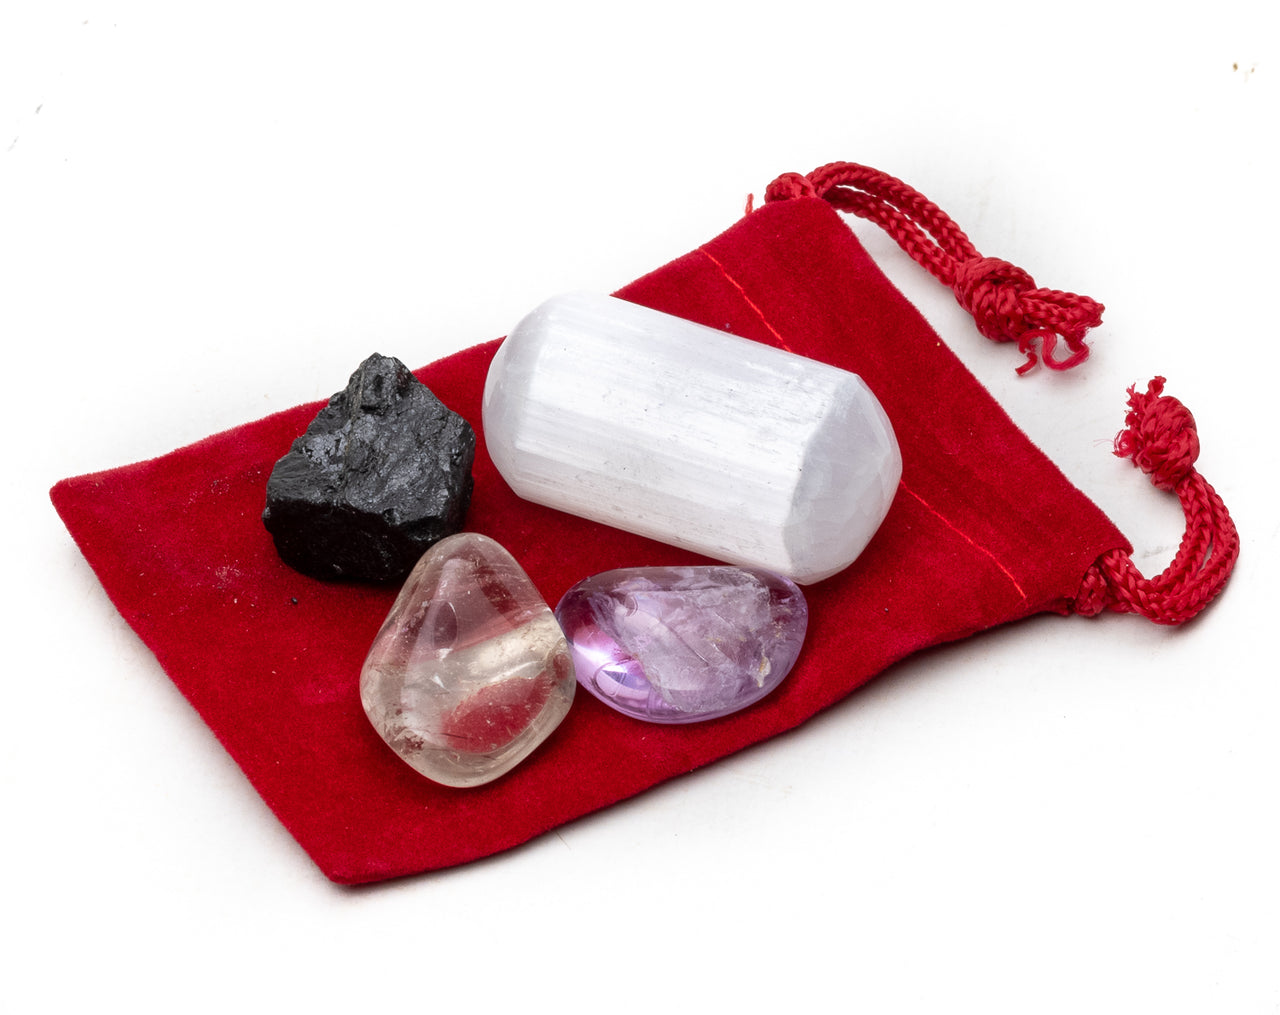 Home Protection Crystals Kit - Buy 1 and Get 1 FREE